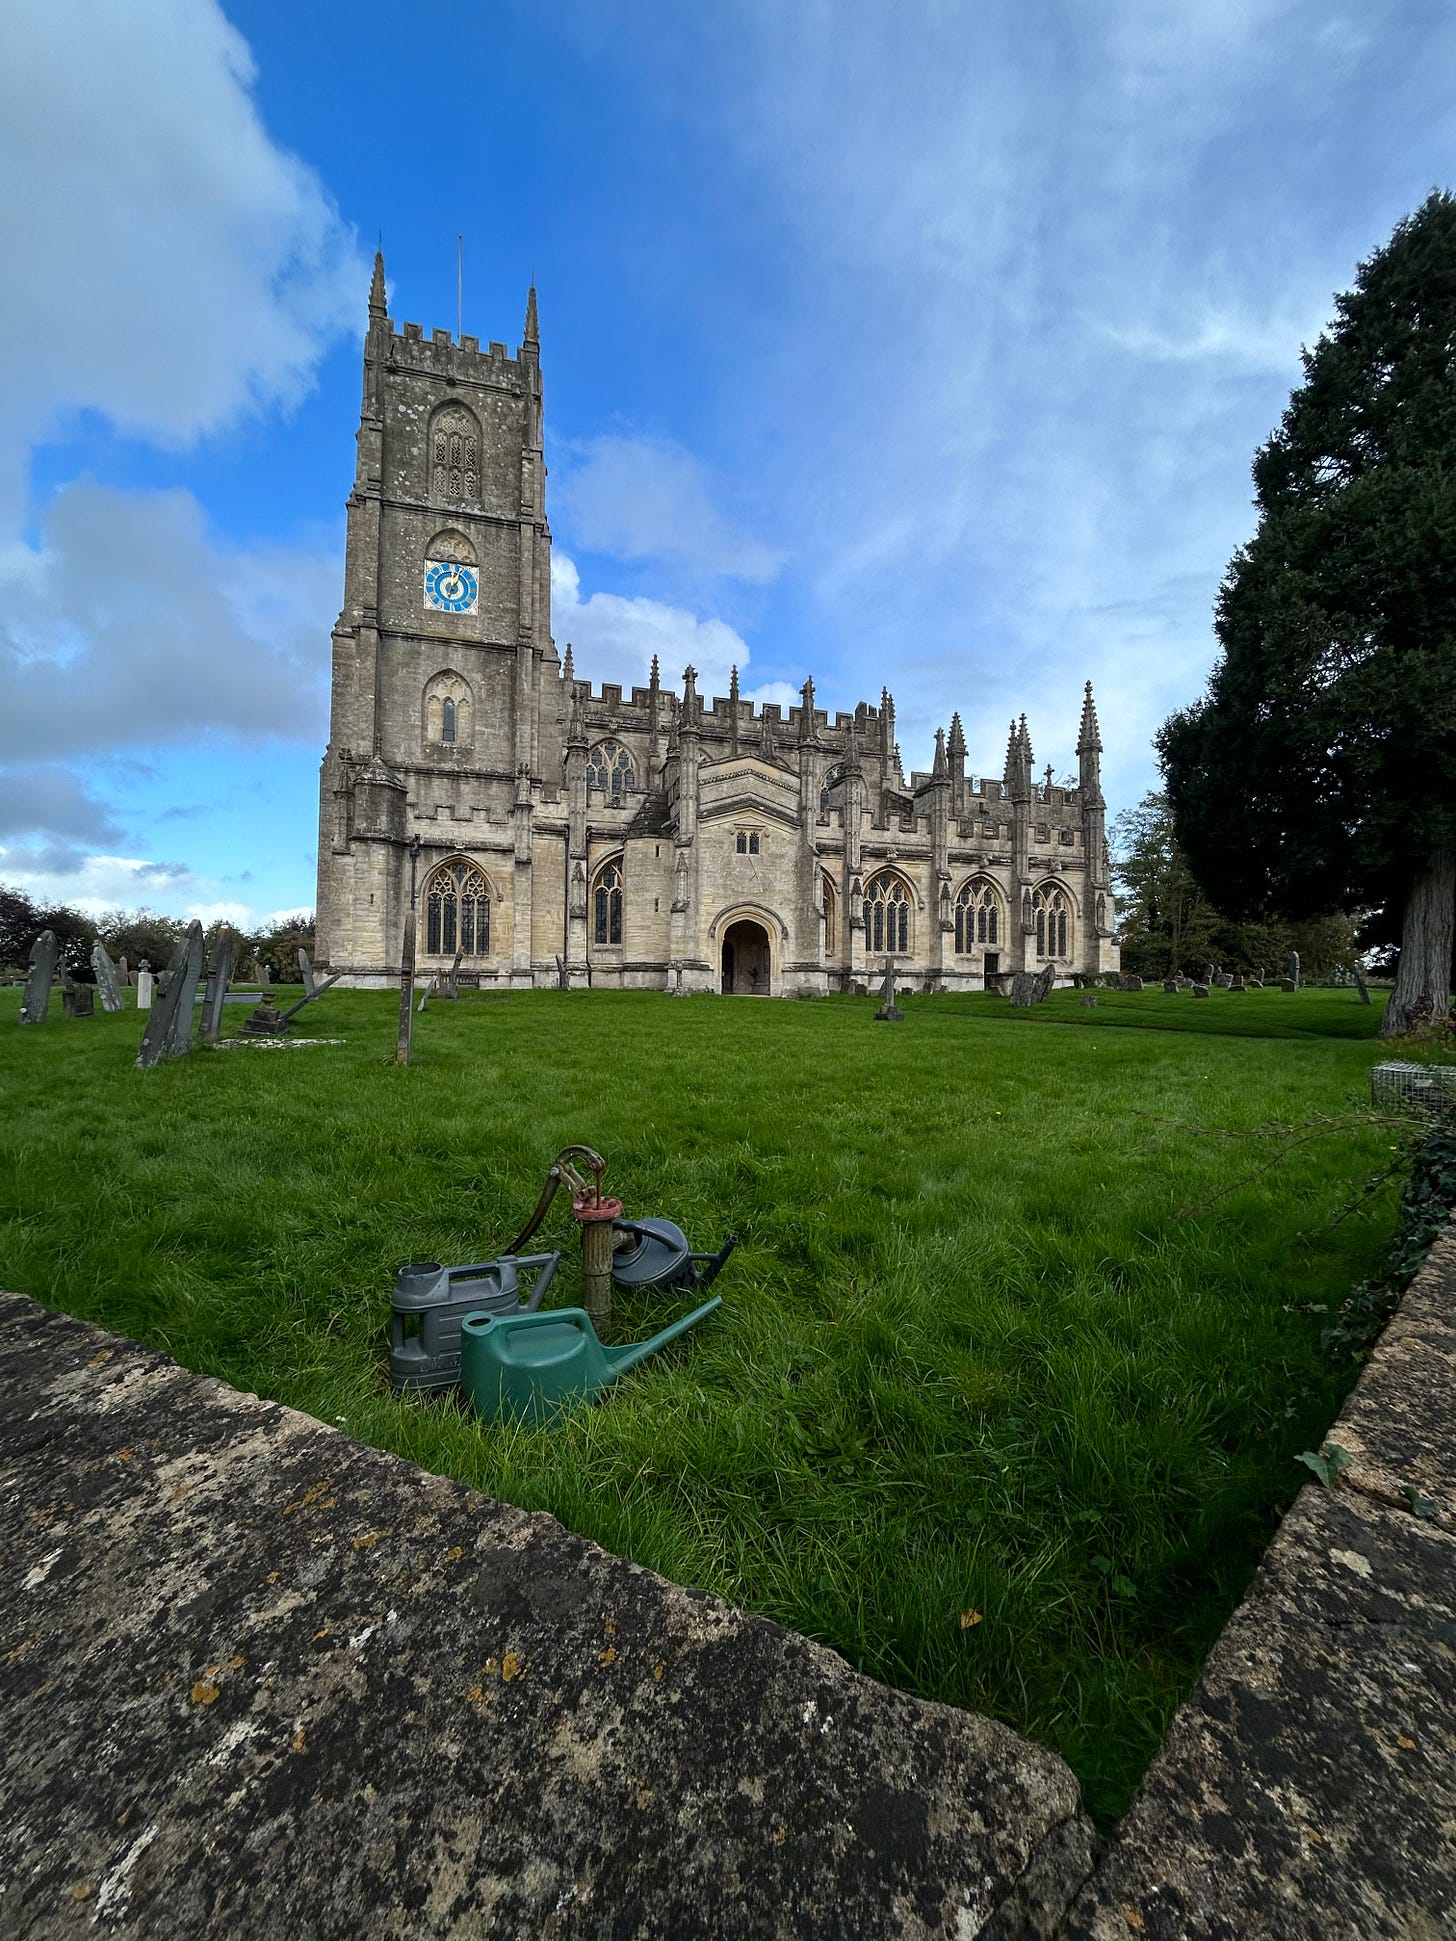 Church of St Mary the Virgin, Steeple Ashton, Wiltshire. Image: Roland's Travels